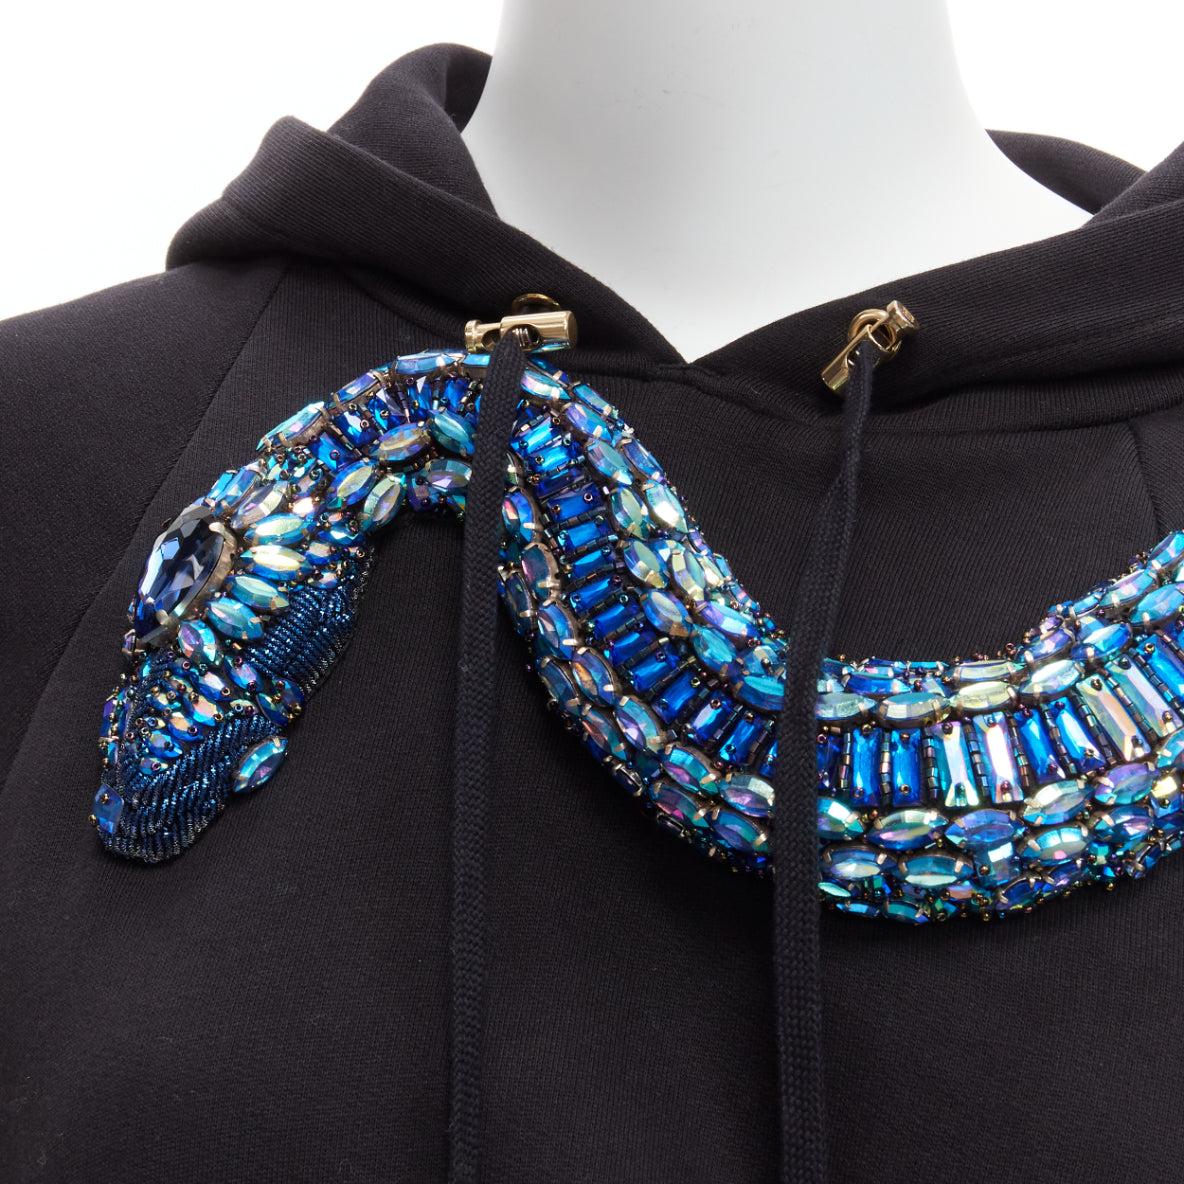 BALMAIN blue jewel embellished snake motif black cotton cropped hoodie XS
Reference: AAWC/A00531
Brand: Balmain
Designer: Olivier Rousteing
Material: Cotton
Color: Black, Blue
Pattern: Solid
Closure: Pullover
Extra Details: Snake-motif embellished